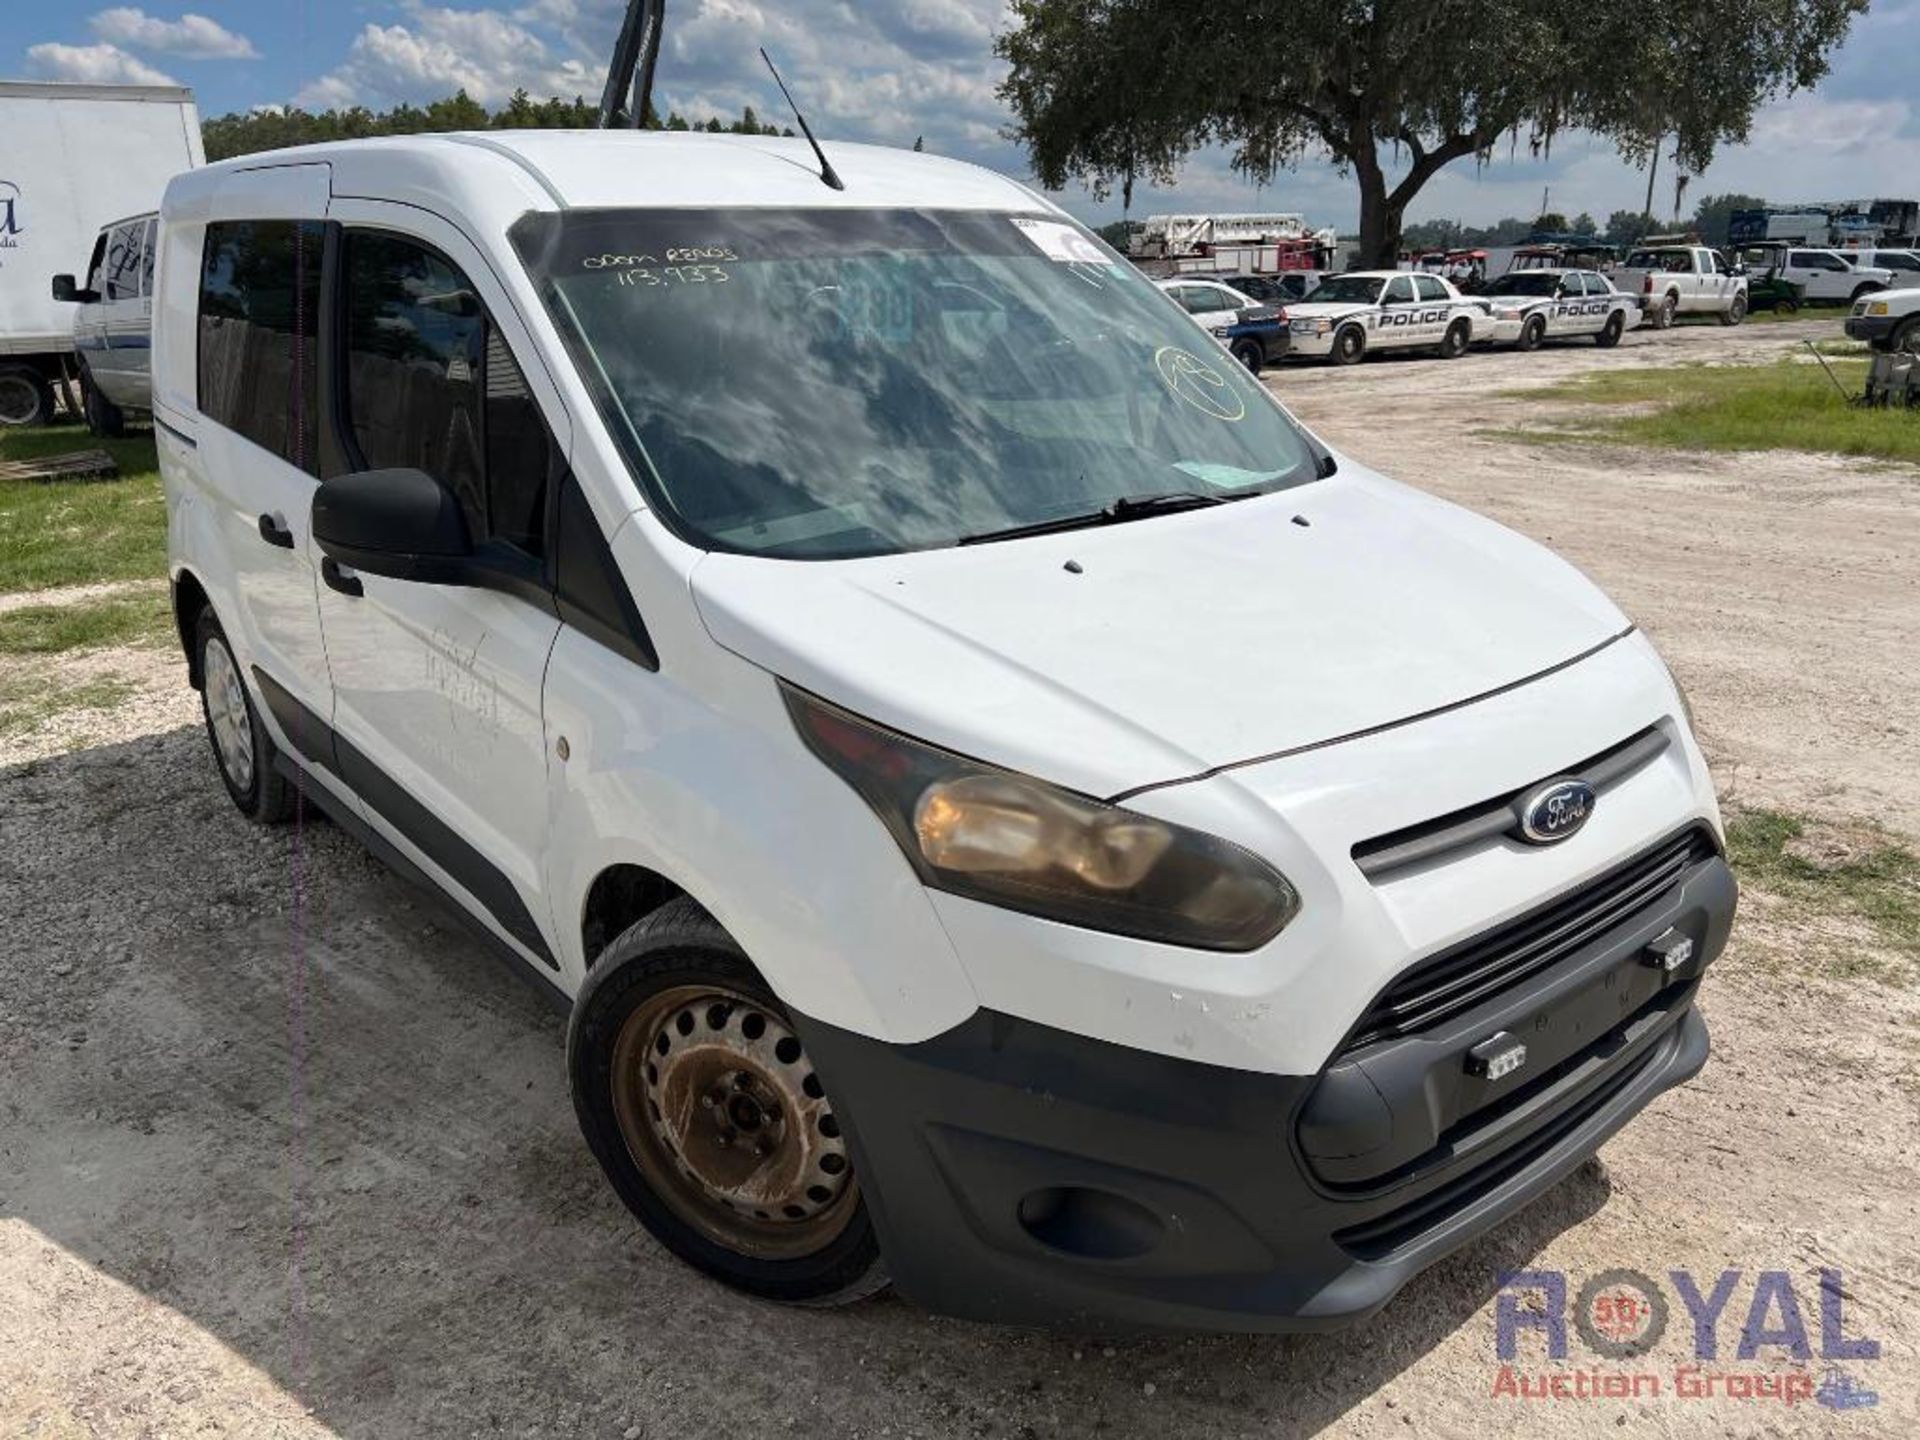 2014 Ford Transit Connect Van - Image 2 of 23